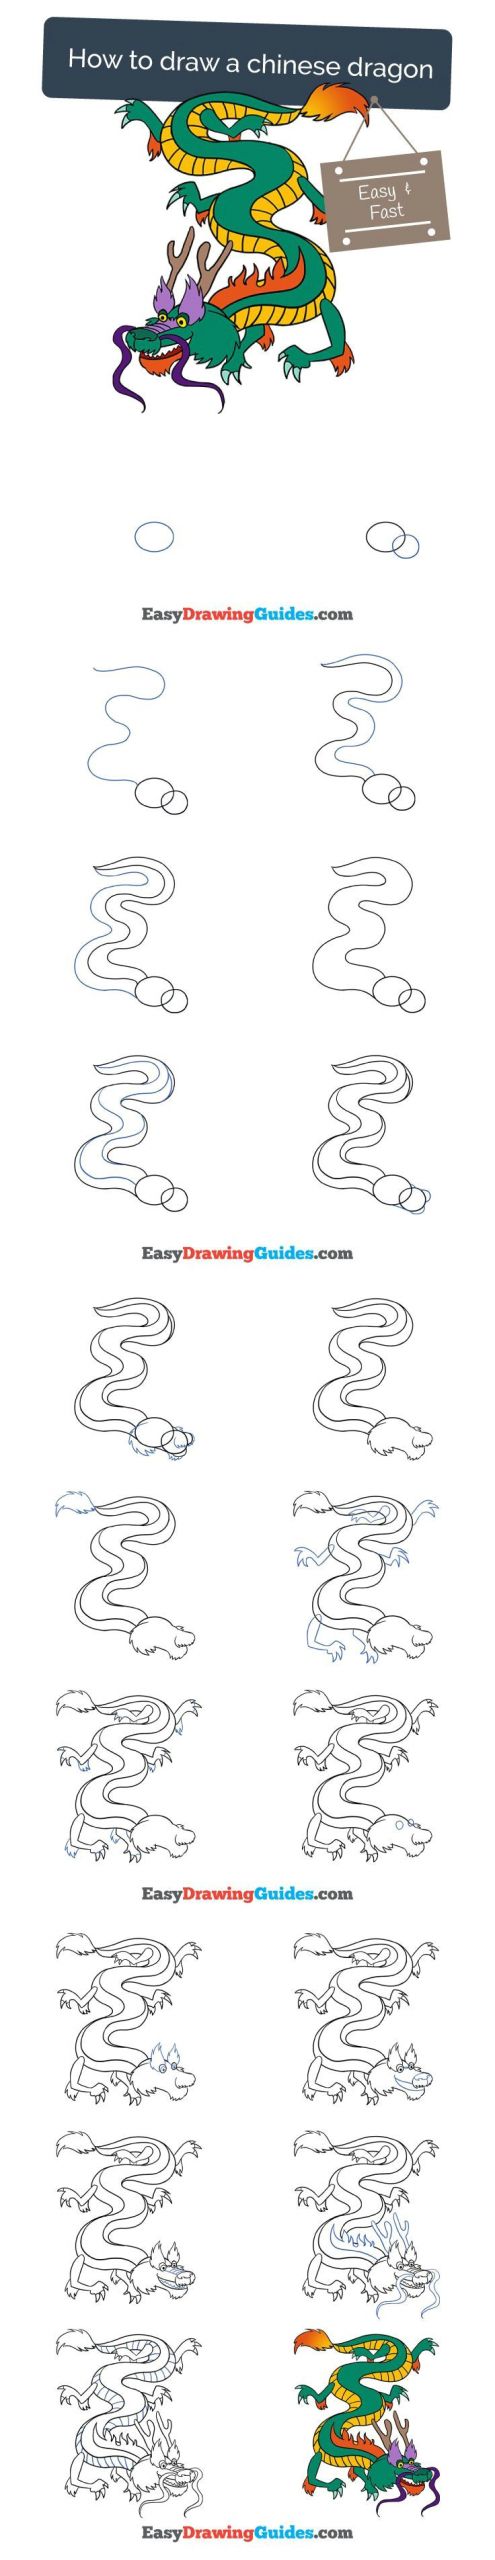 Chinese Drawings Easy How to Draw A Chinese Dragon Easy Drawings Drawing